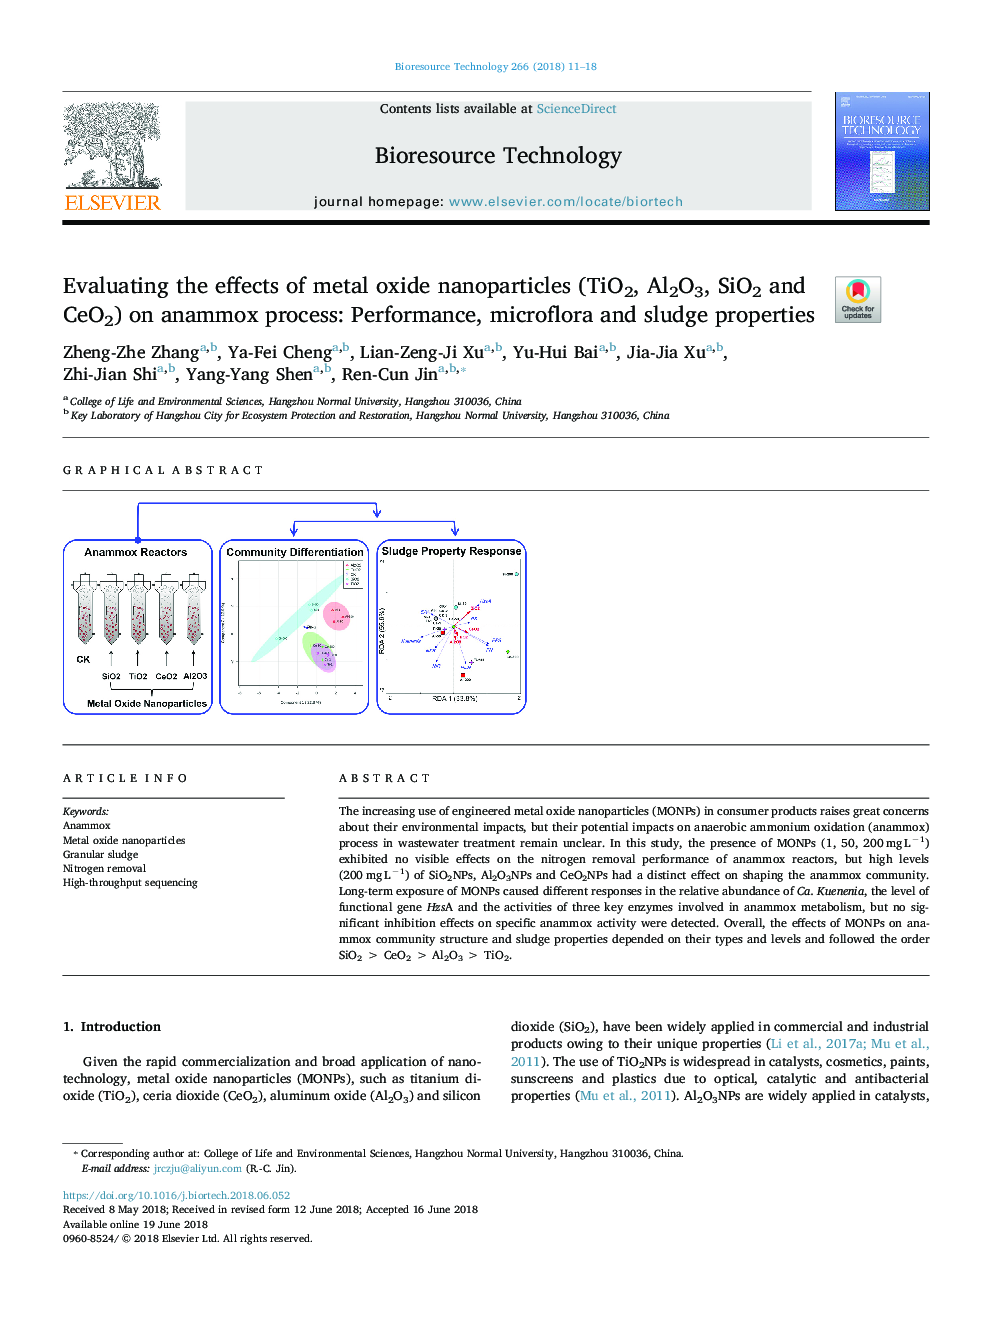 Evaluating the effects of metal oxide nanoparticles (TiO2, Al2O3, SiO2 and CeO2) on anammox process: Performance, microflora and sludge properties